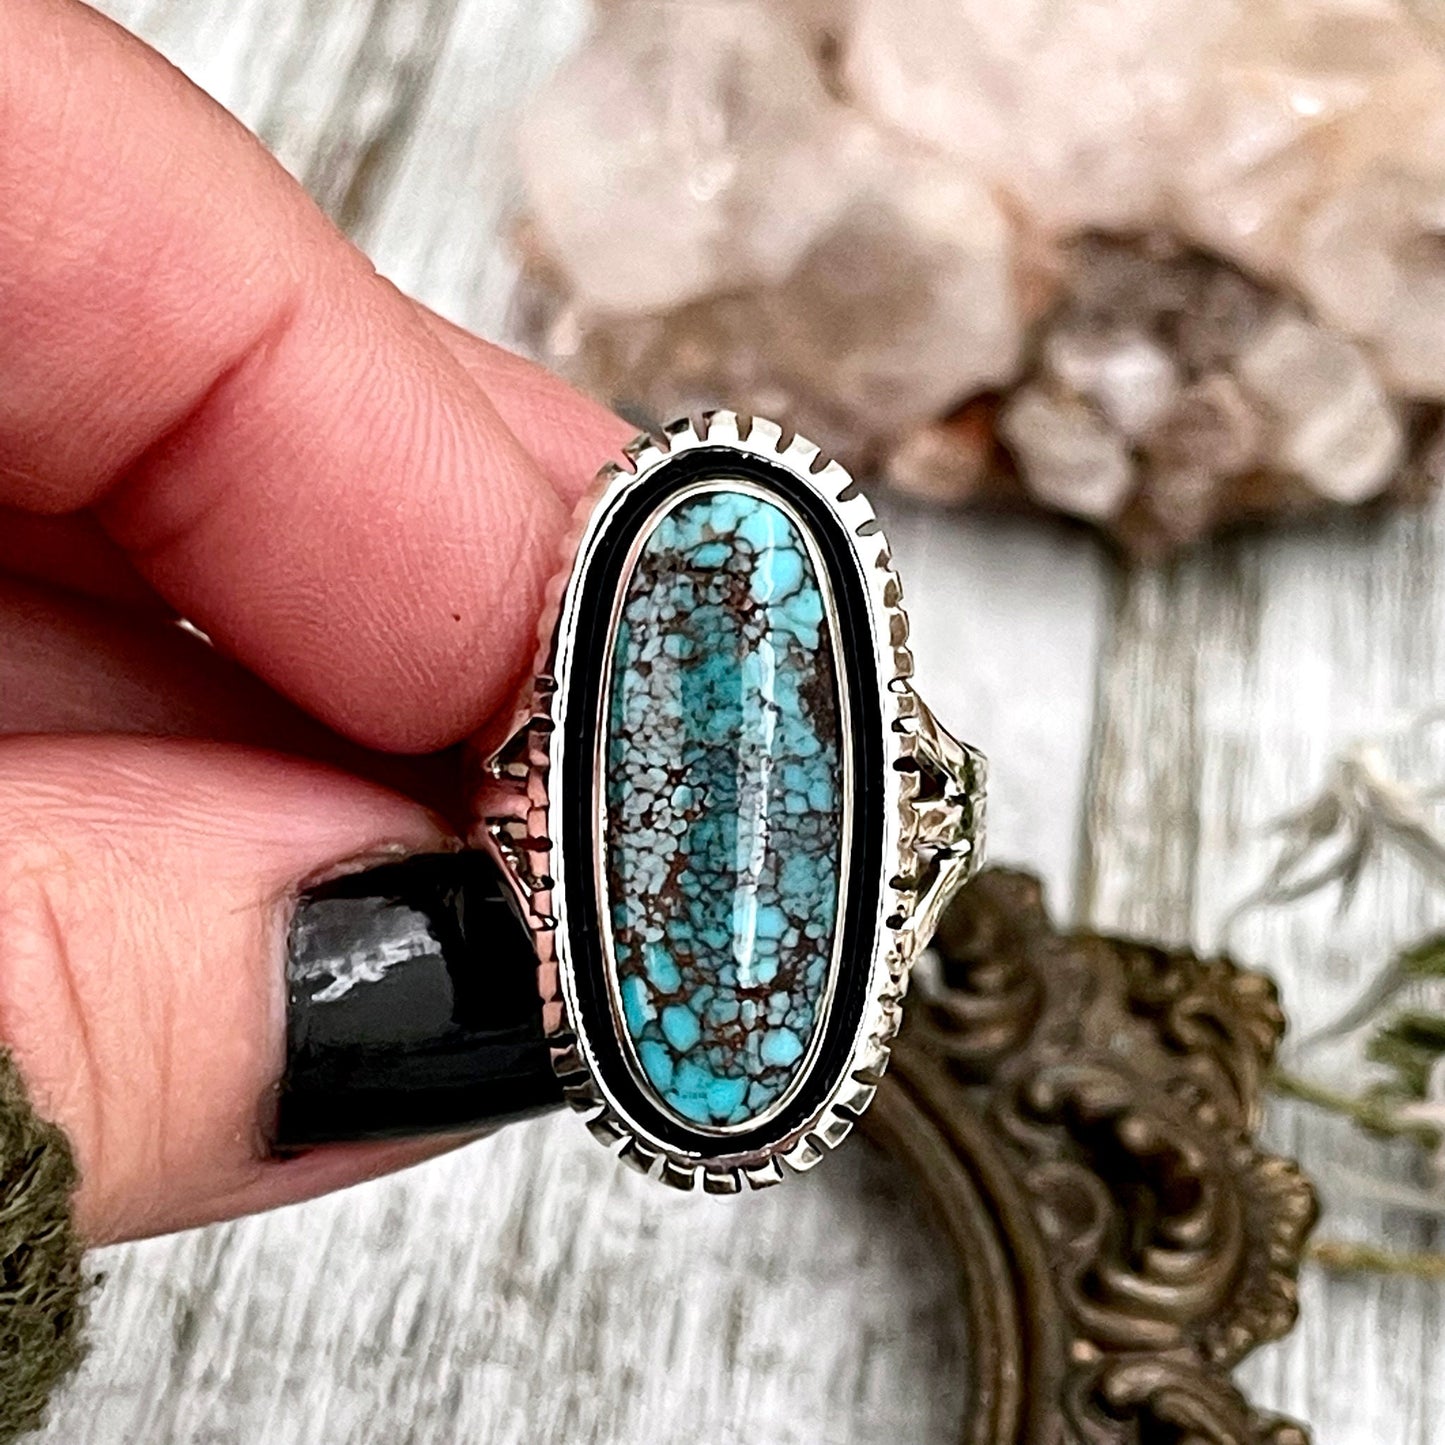 Size 8 Tibetan Turquoise Statement Ring Set in Sterling Silver  / Curated by FOXLARK Collection